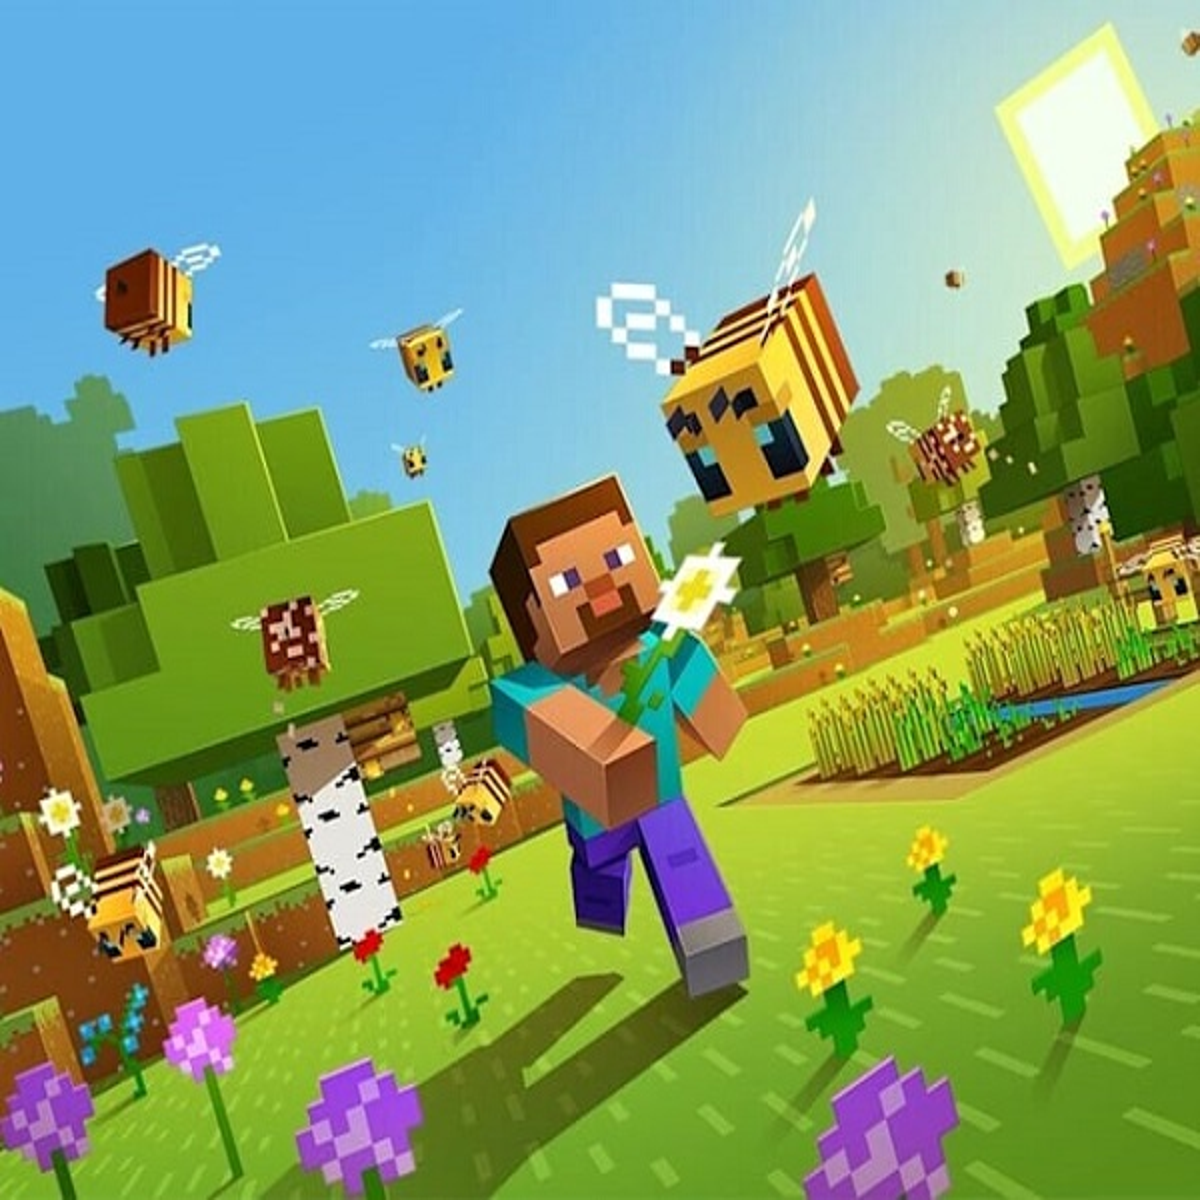 Mojang games to require Microsoft account